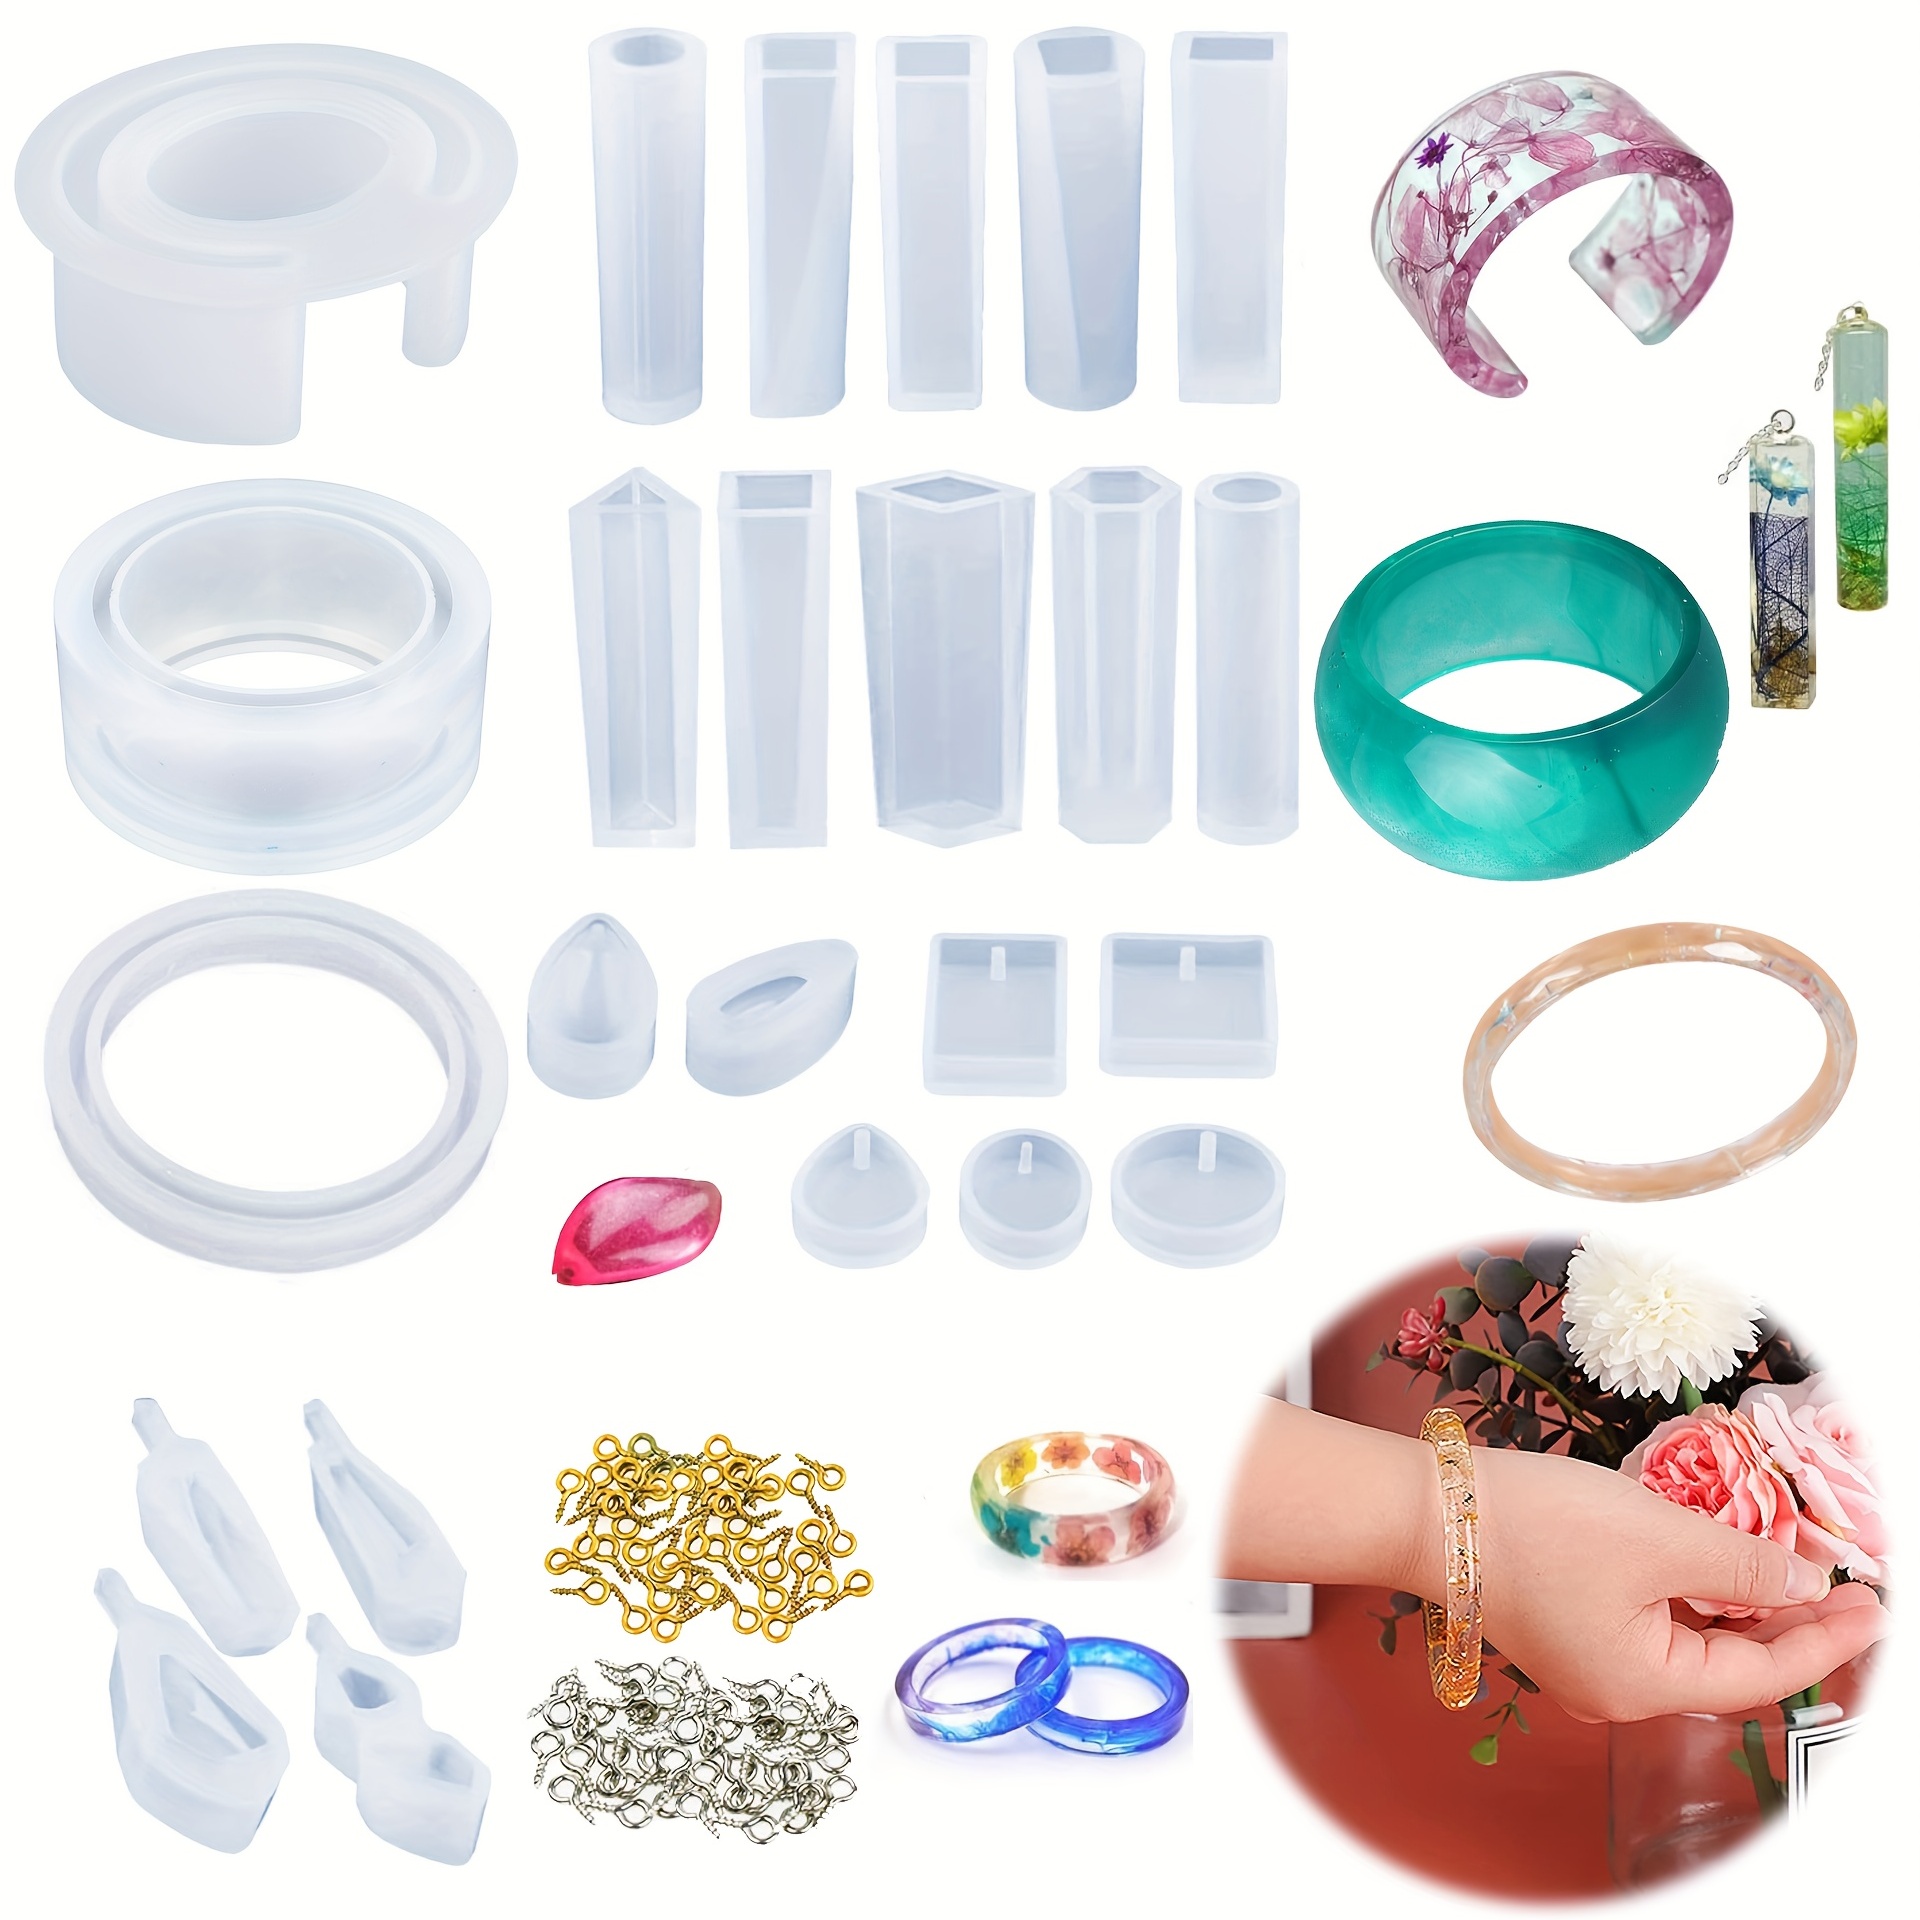 Resin Ring Molds Silicone, Silicone Molds For Epoxy Resin, Resin